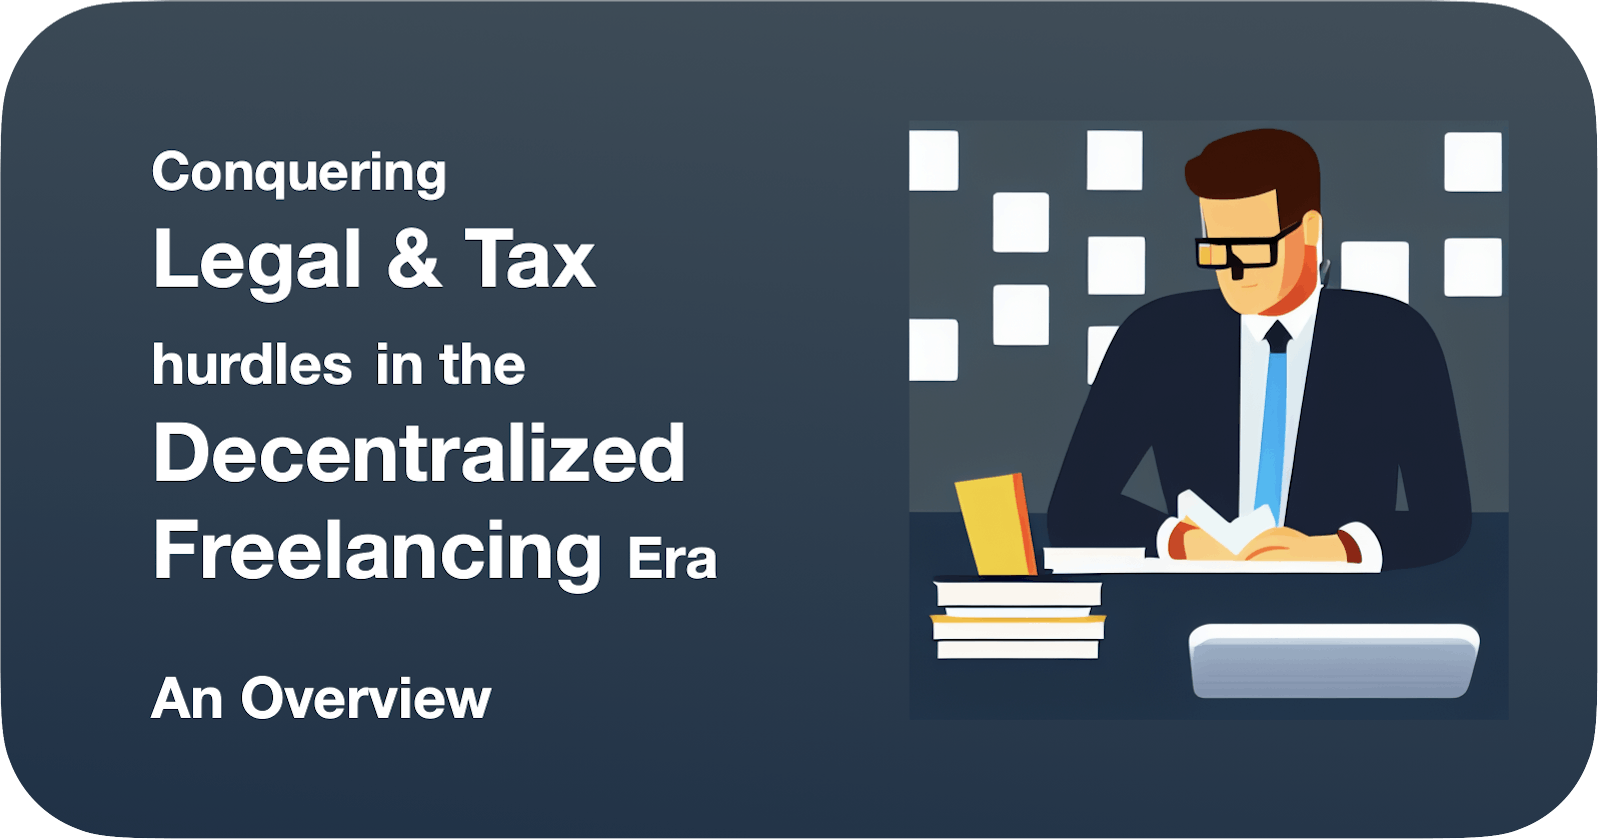 Conquering Legal & Tax hurdles in the Decentralized Freelancing Era